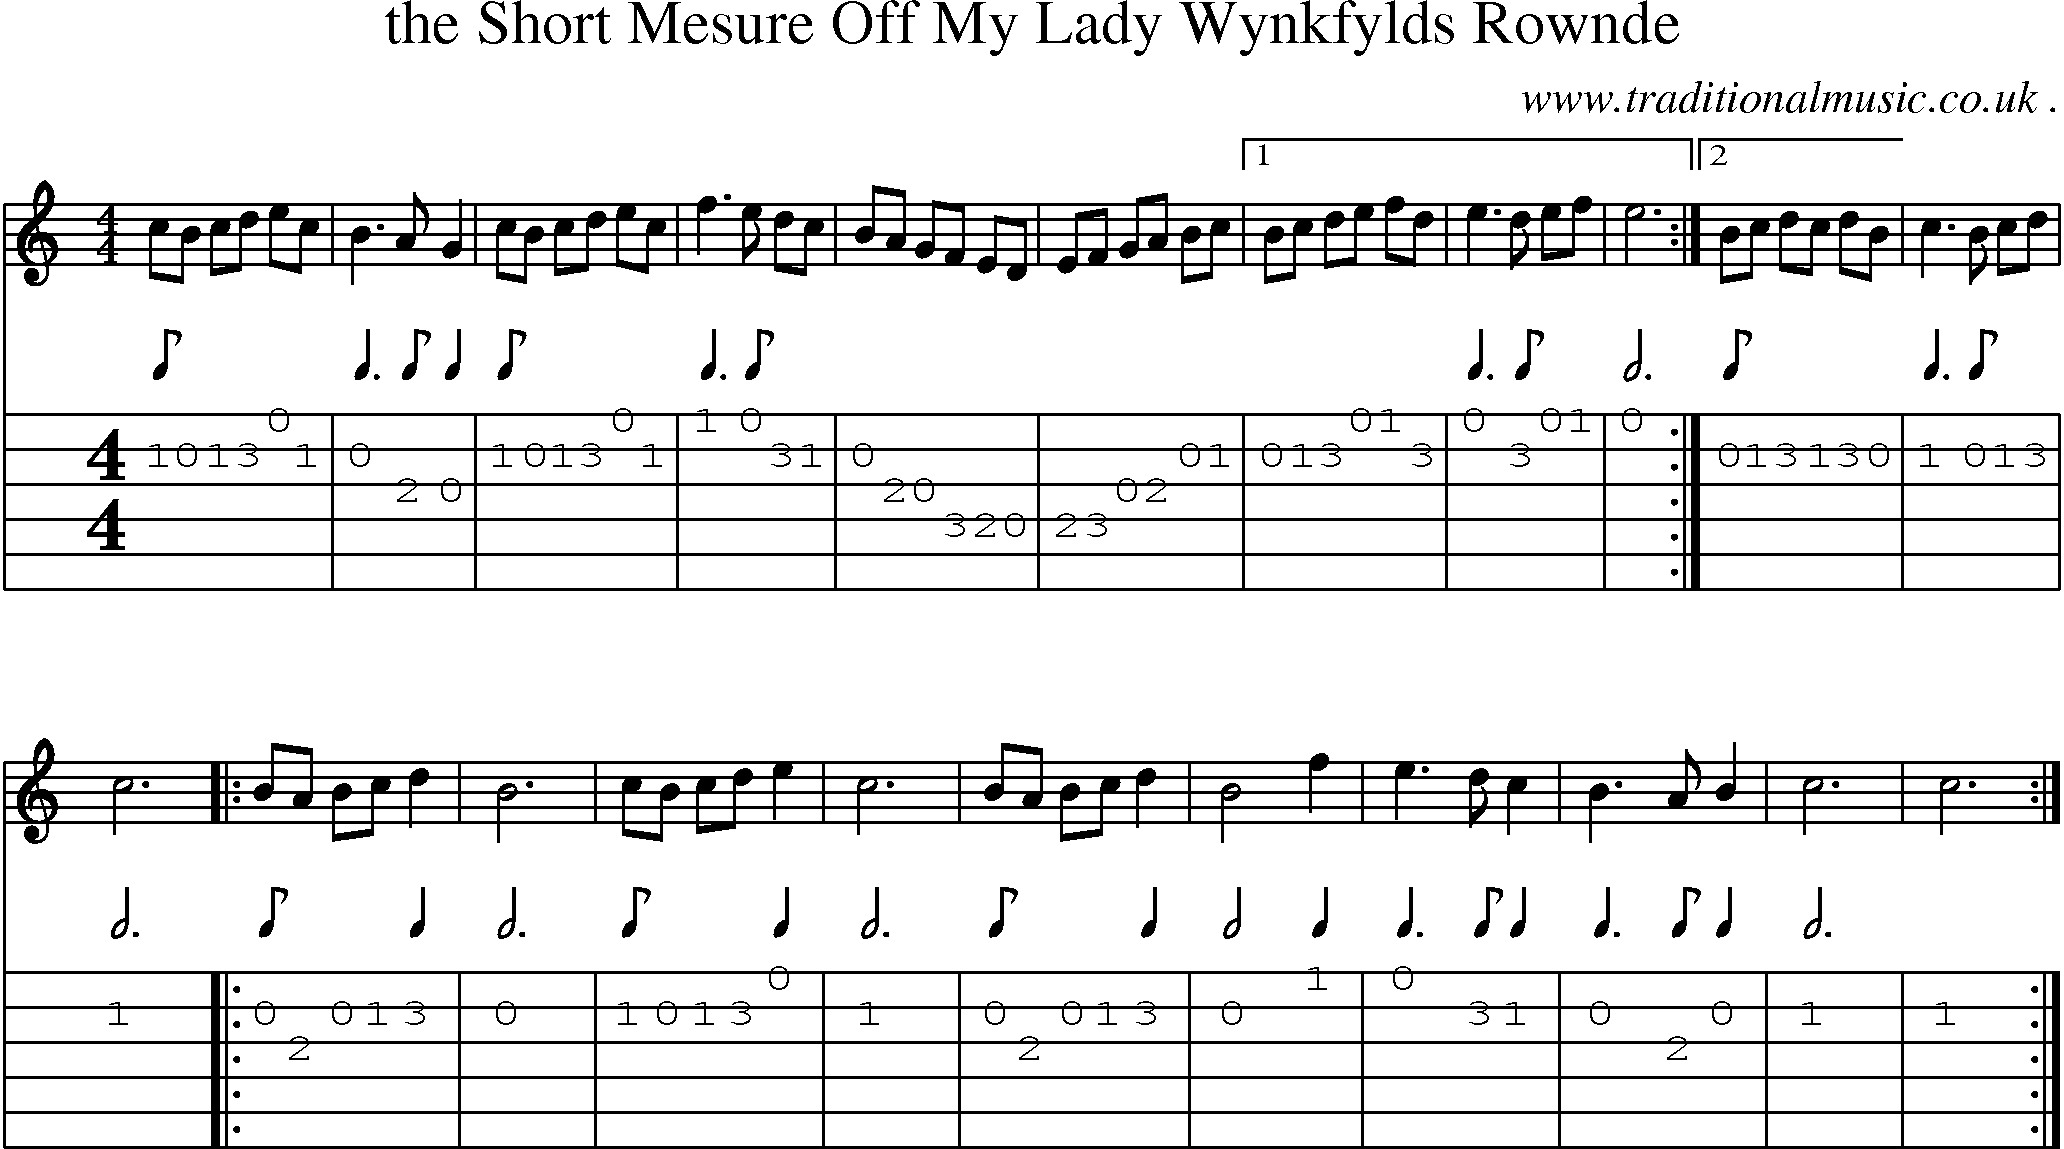 Sheet-Music and Guitar Tabs for The Short Mesure Off My Lady Wynkfylds Rownde